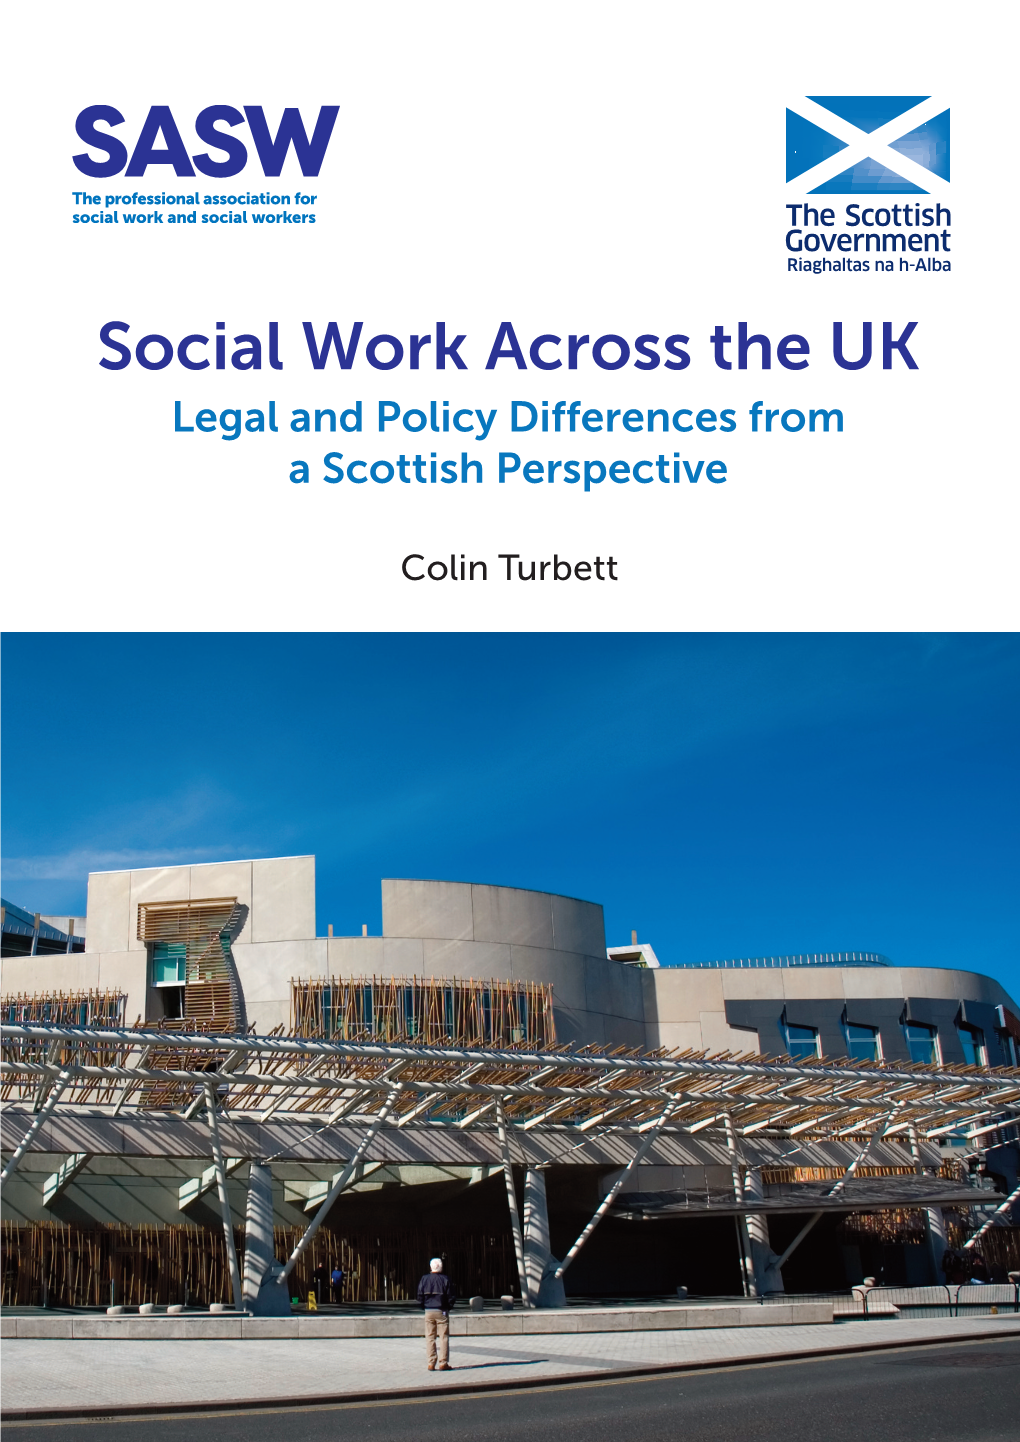 Social Work Across the UK Legal and Policy Differences from a Scottish Perspective